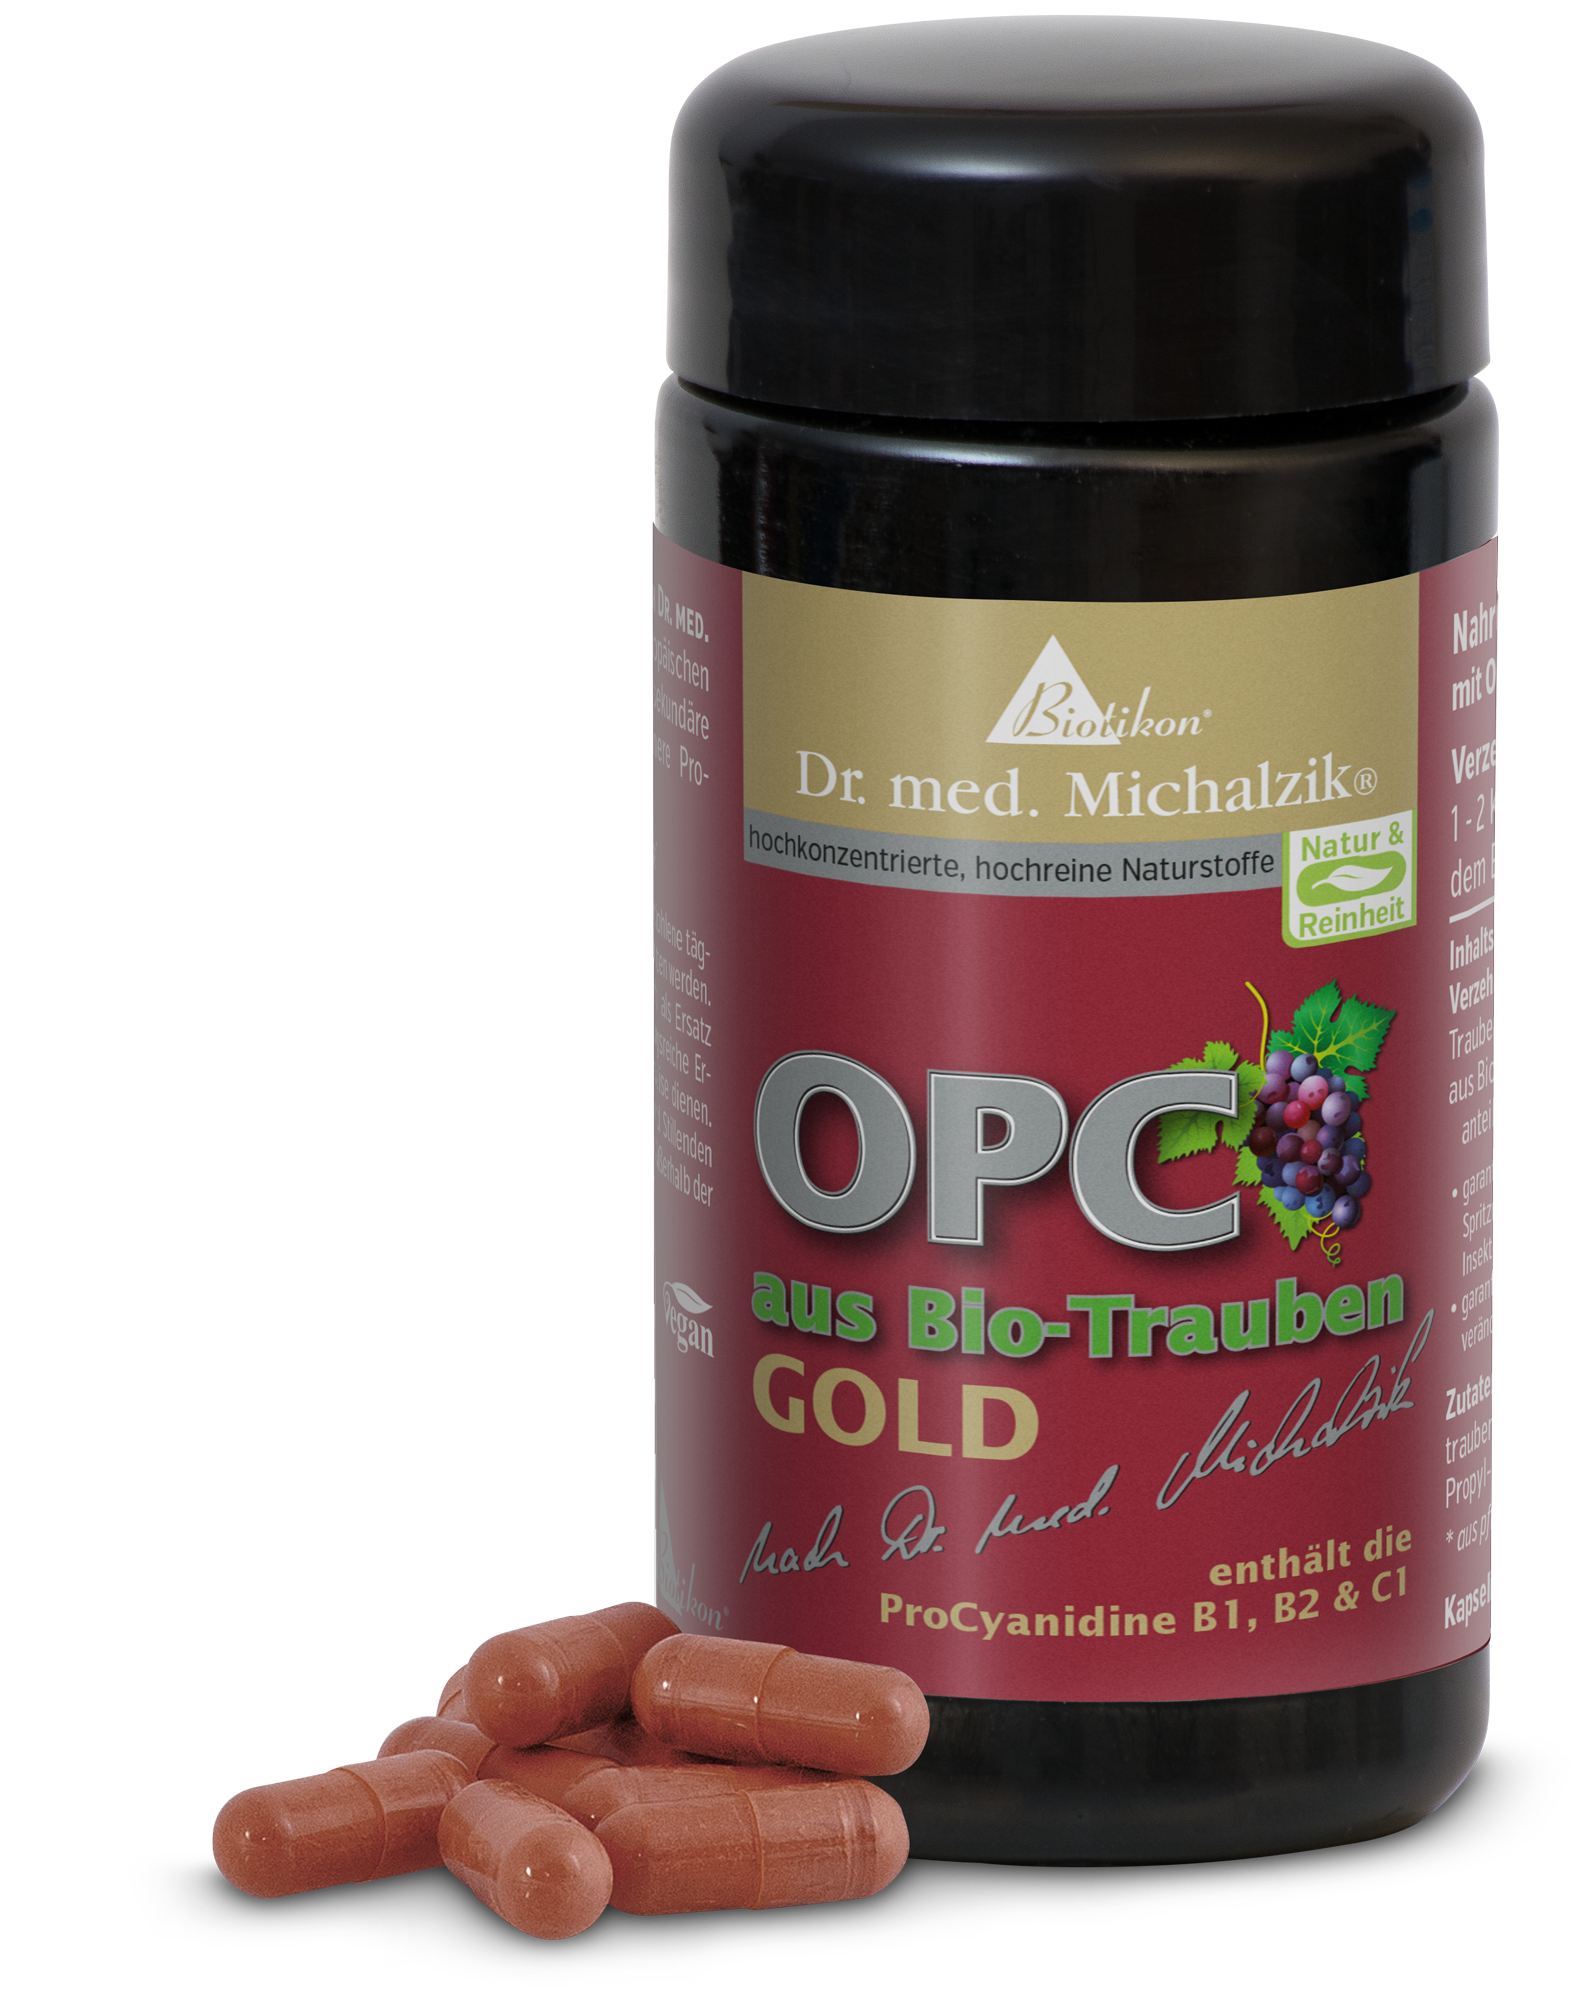 OPC GOLD from Organic Grapes